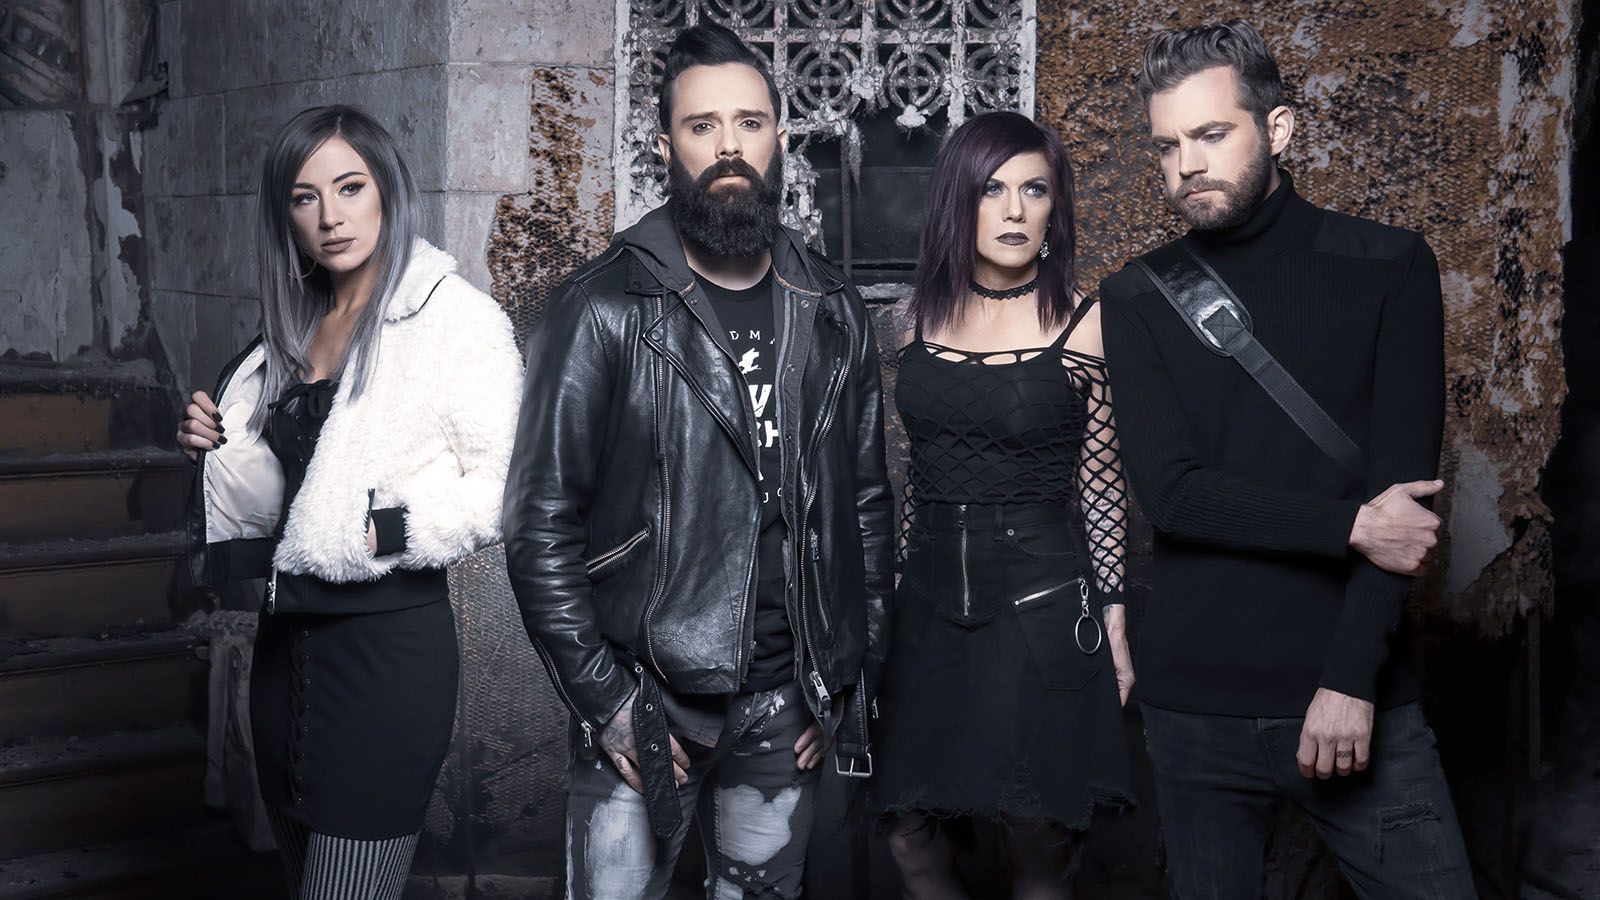 Skillet will be joined by co-headliner Theory of a Deadman on Tuesday, Dec. 5, at Memorial Coliseum, along with opening act Saint Asonia.